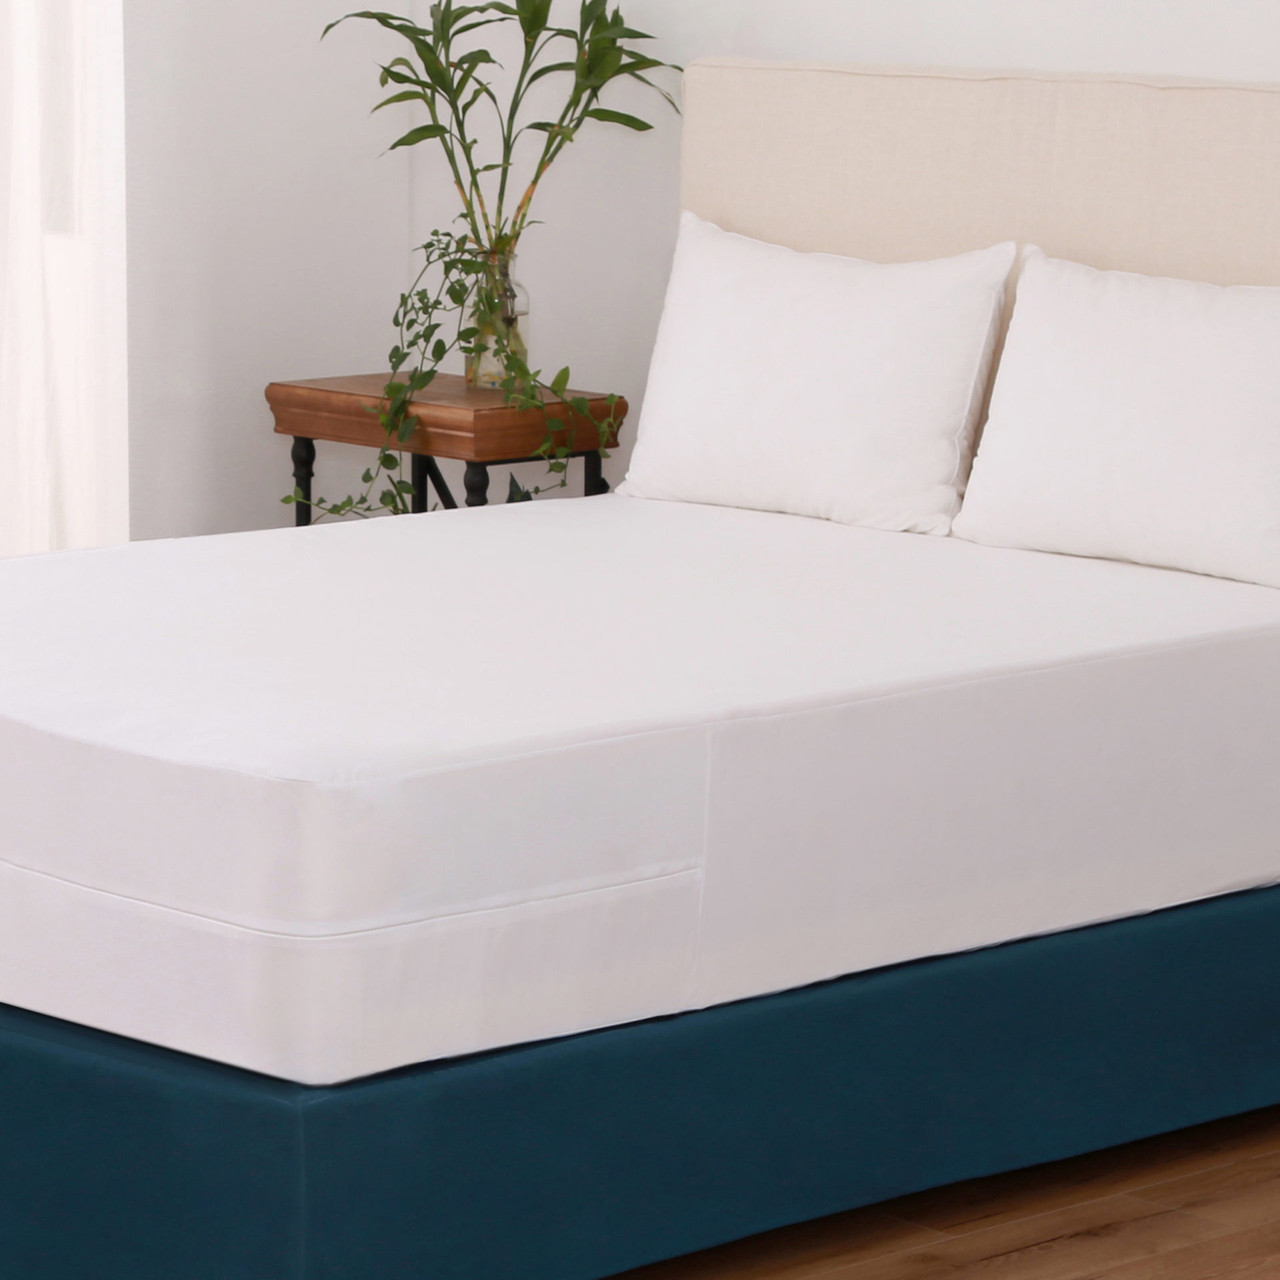 Protextile Mattress Encasement featured with white pillows and light wooden accents.